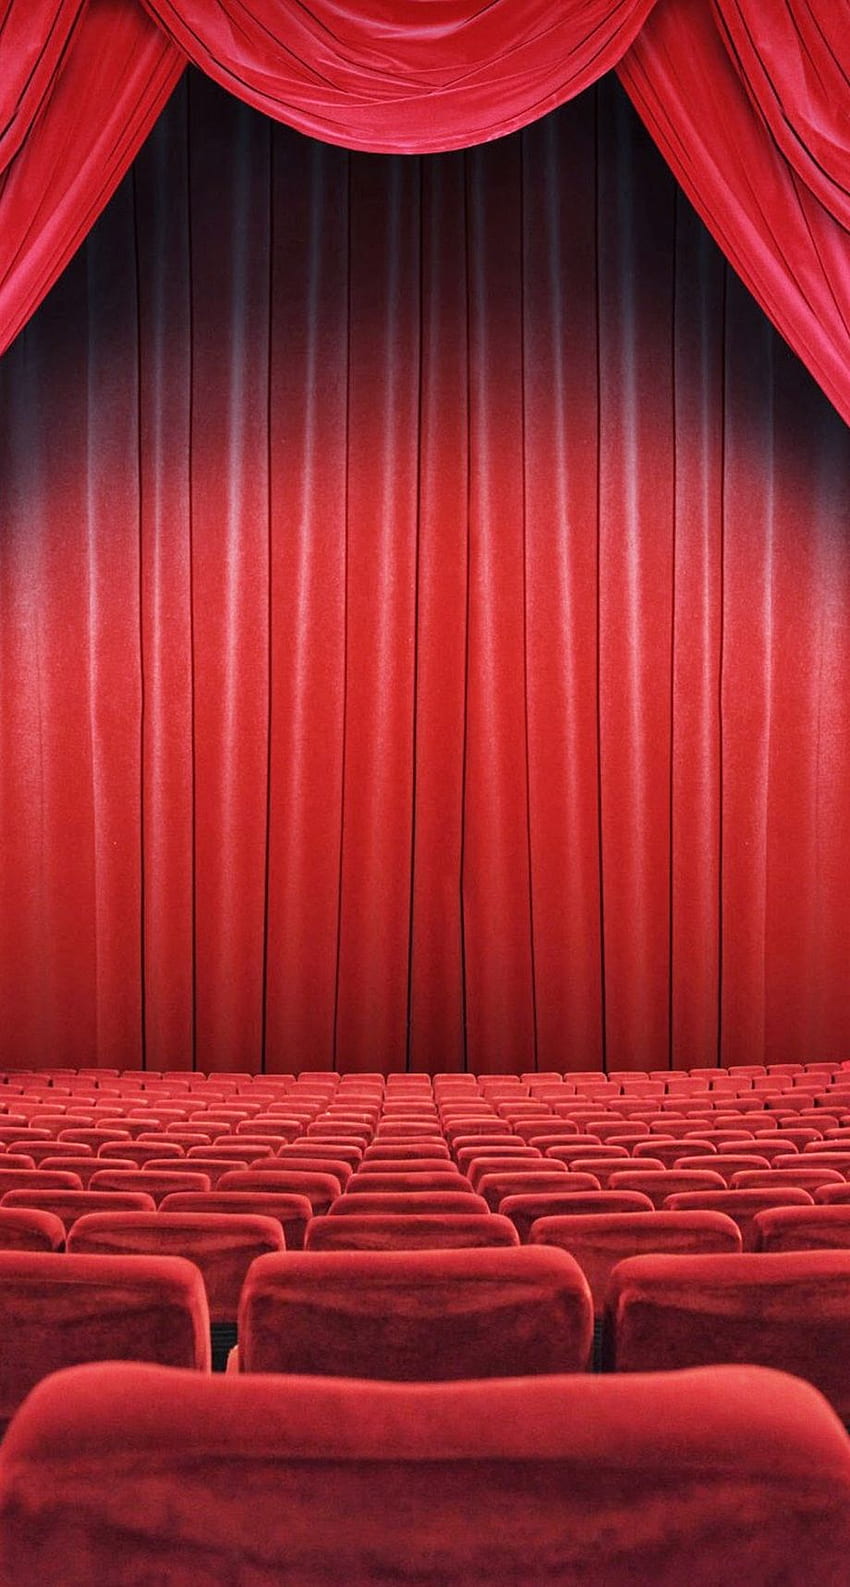 Theatre Seats Red Curtain for Phoned, Stage Curtain HD phone wallpaper